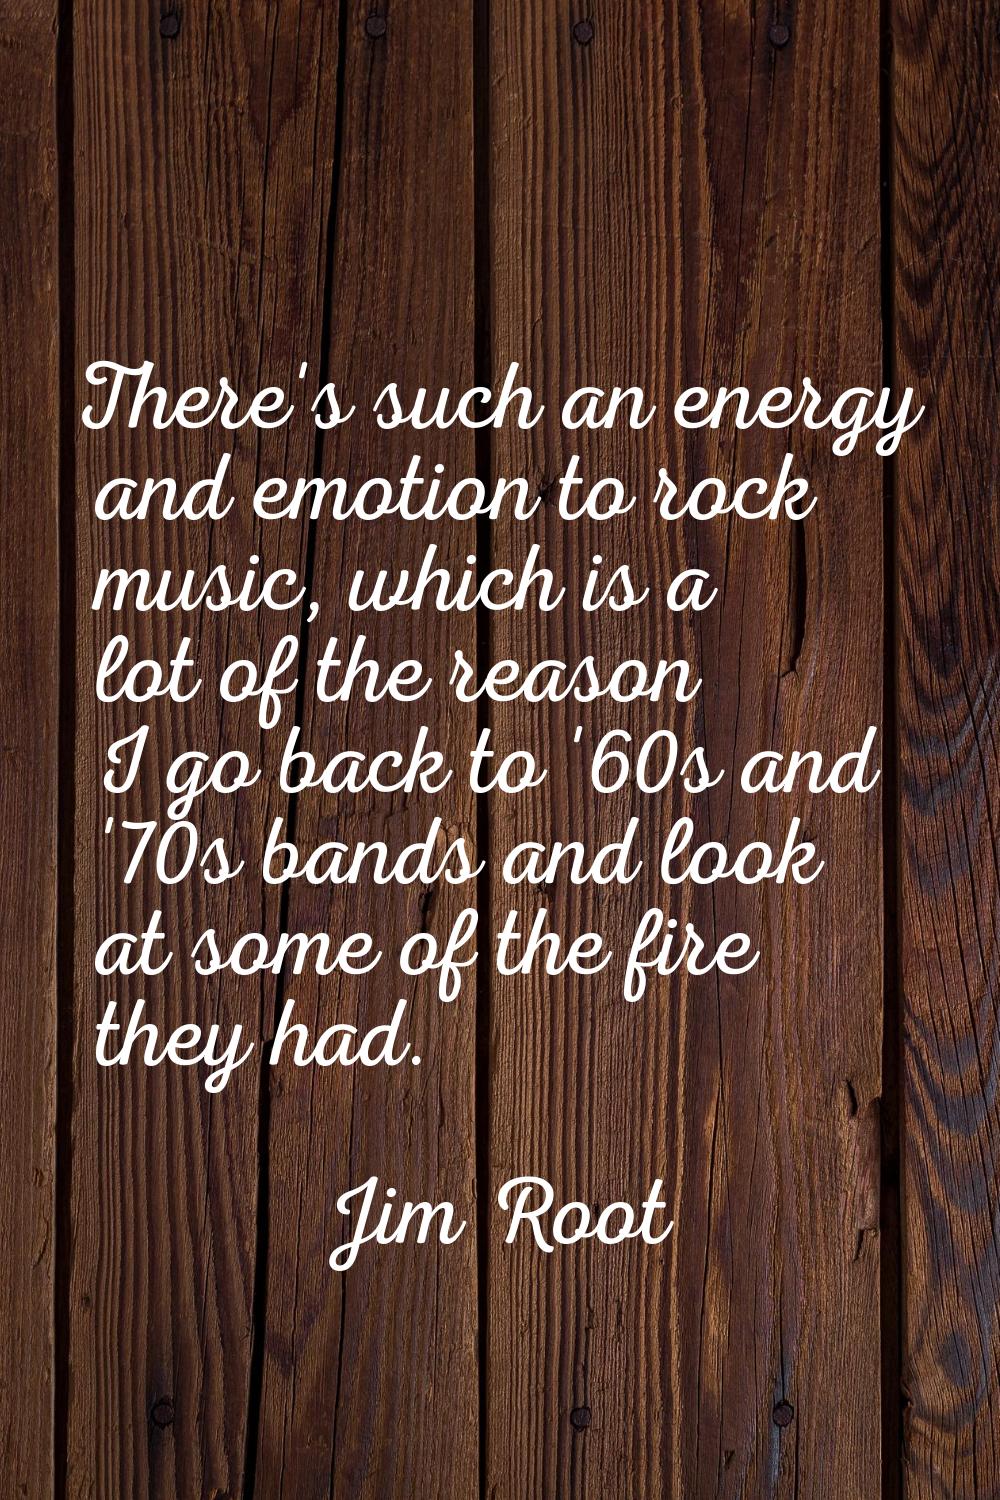 There's such an energy and emotion to rock music, which is a lot of the reason I go back to '60s an